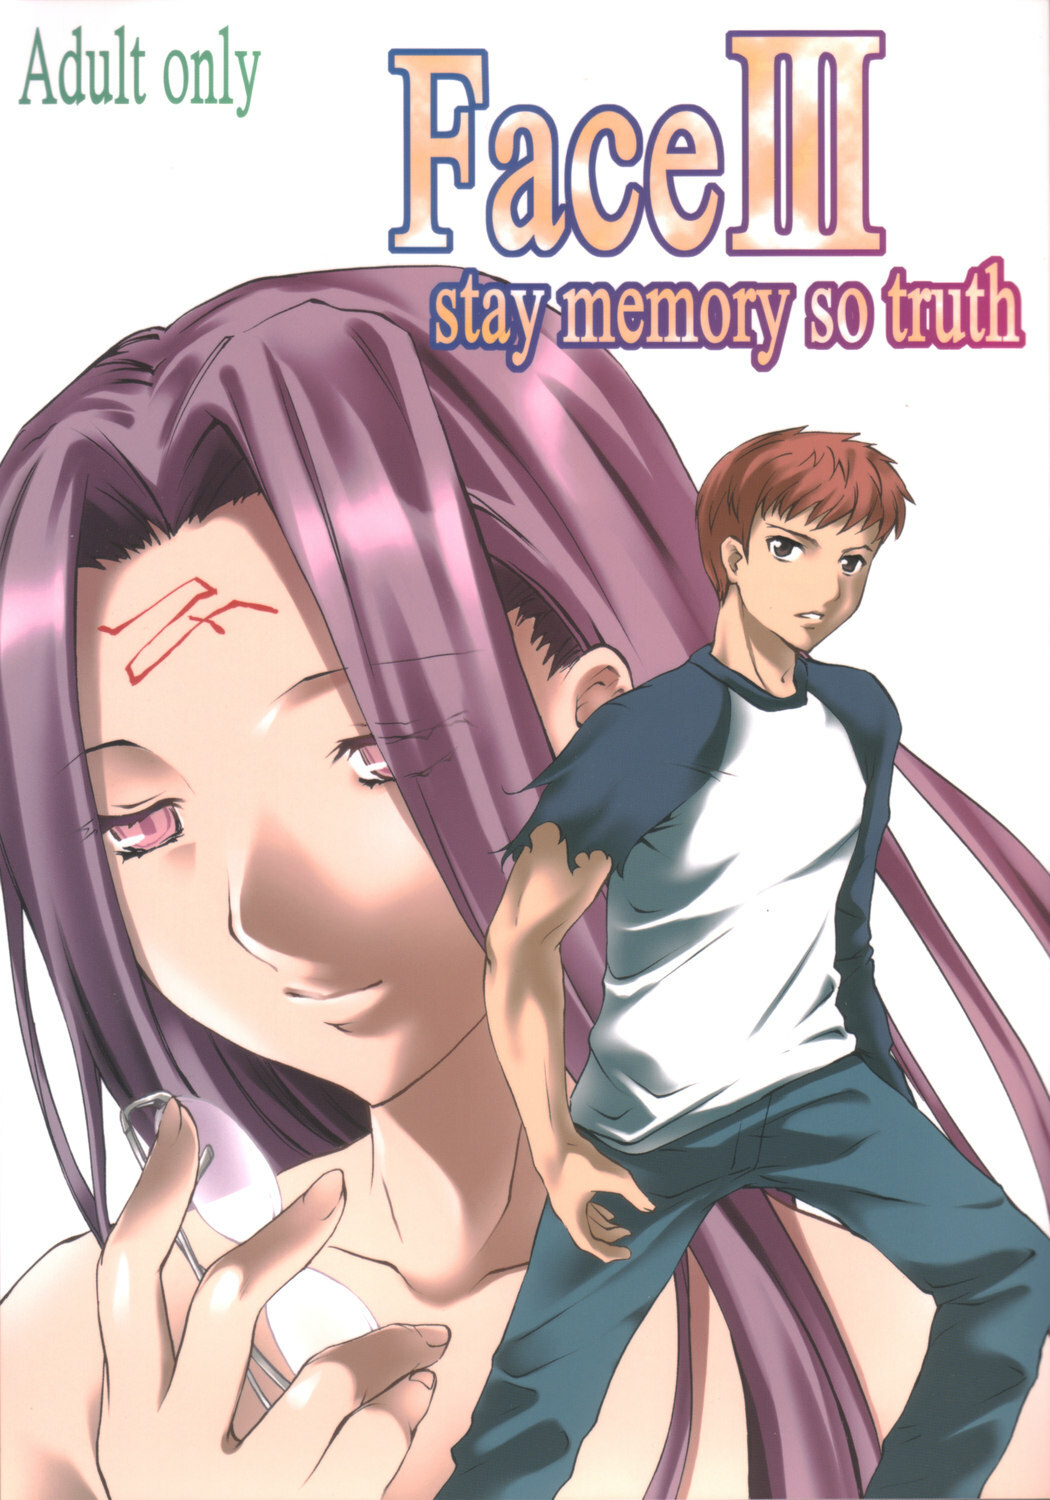 (CR37) [Clover Kai (Emua)] Face III stay memory so truth (Fate/stay night) page 1 full